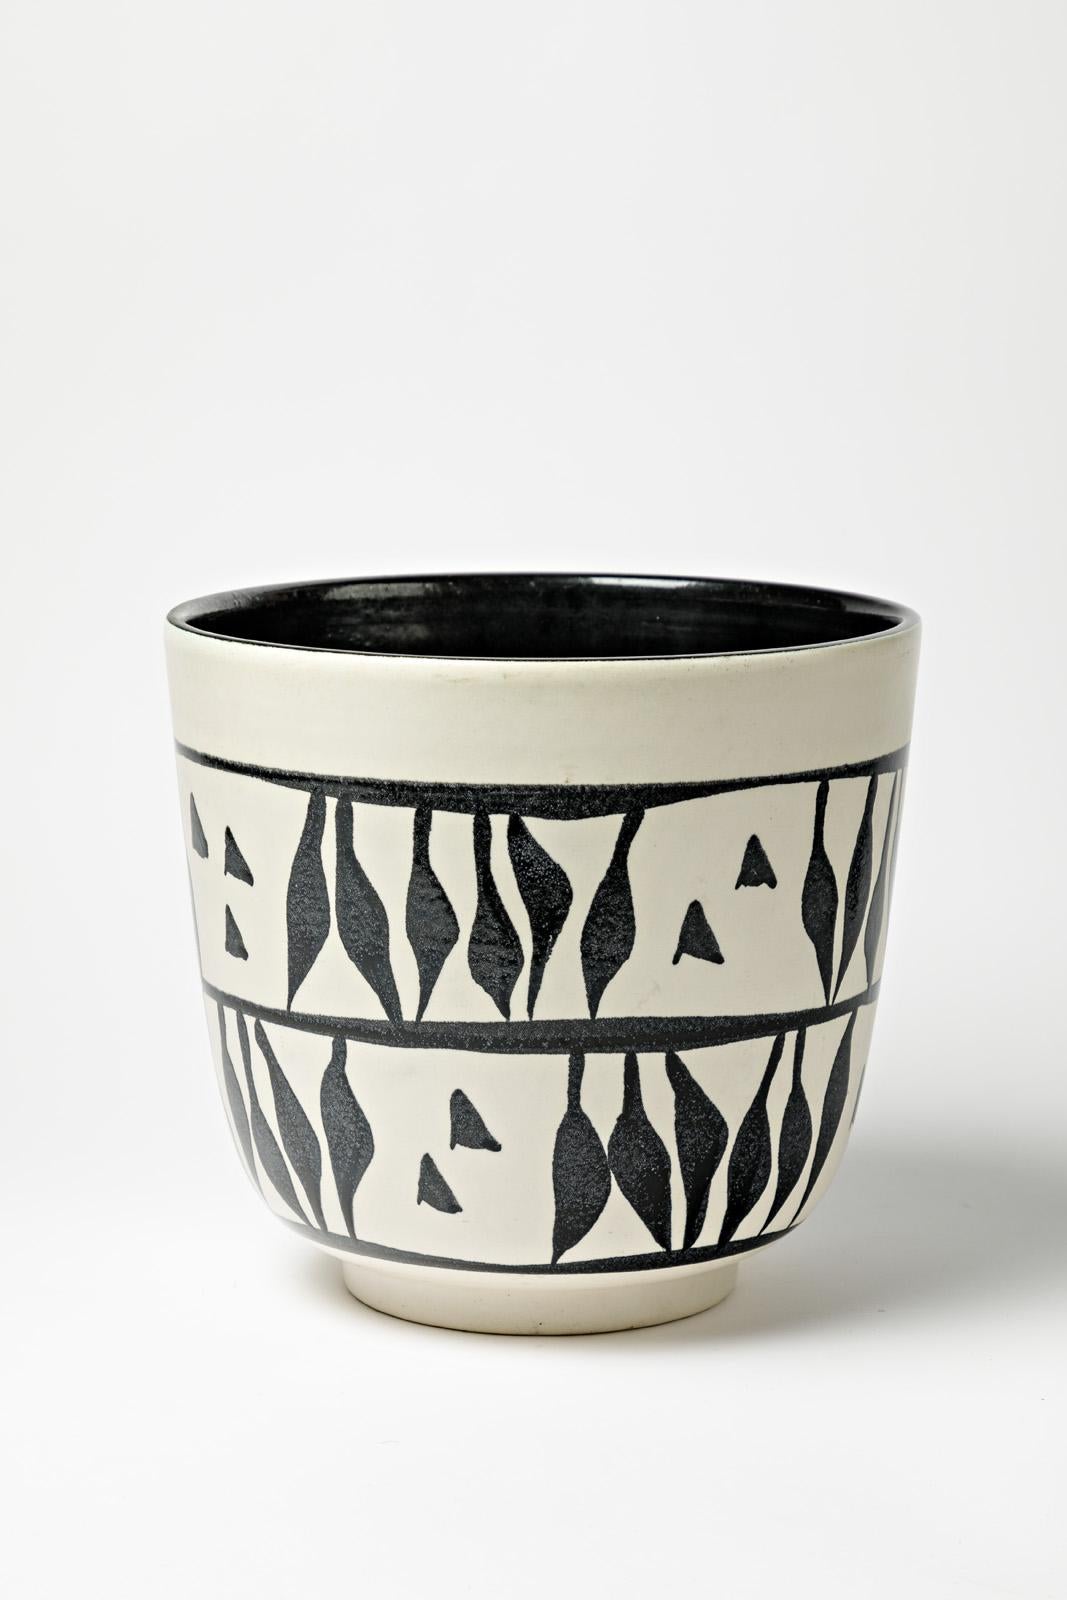 French Black and White 20th Century Ceramic Planter Cachepot Vase by Elchinger, 1950 For Sale